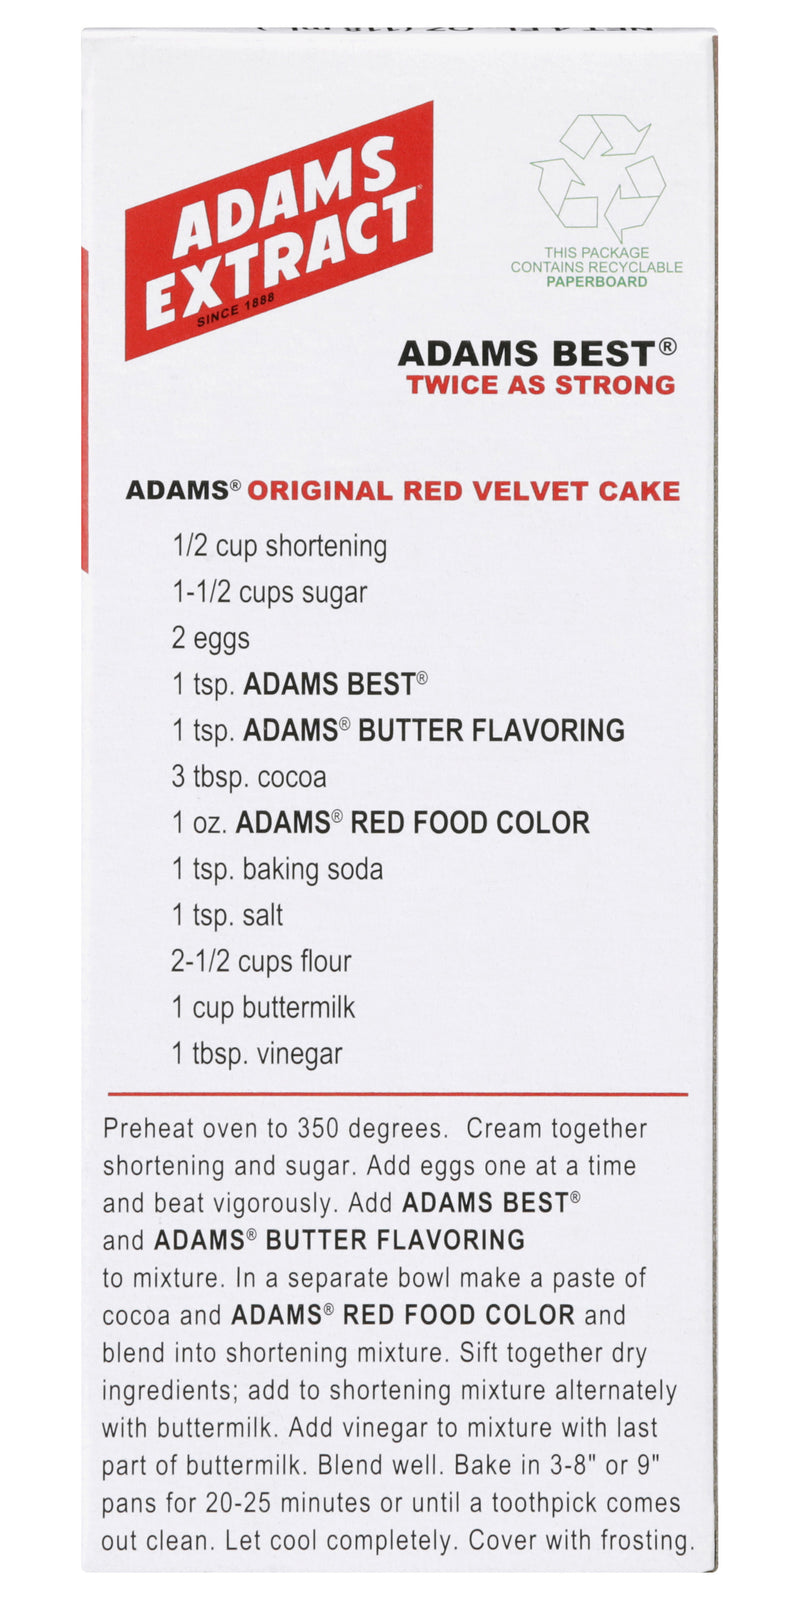 Adams Best Extracts, Vanilla Flavor, Twice as Strong, Gluten Free, 4 FL OZ Bottle (Pack of 1)